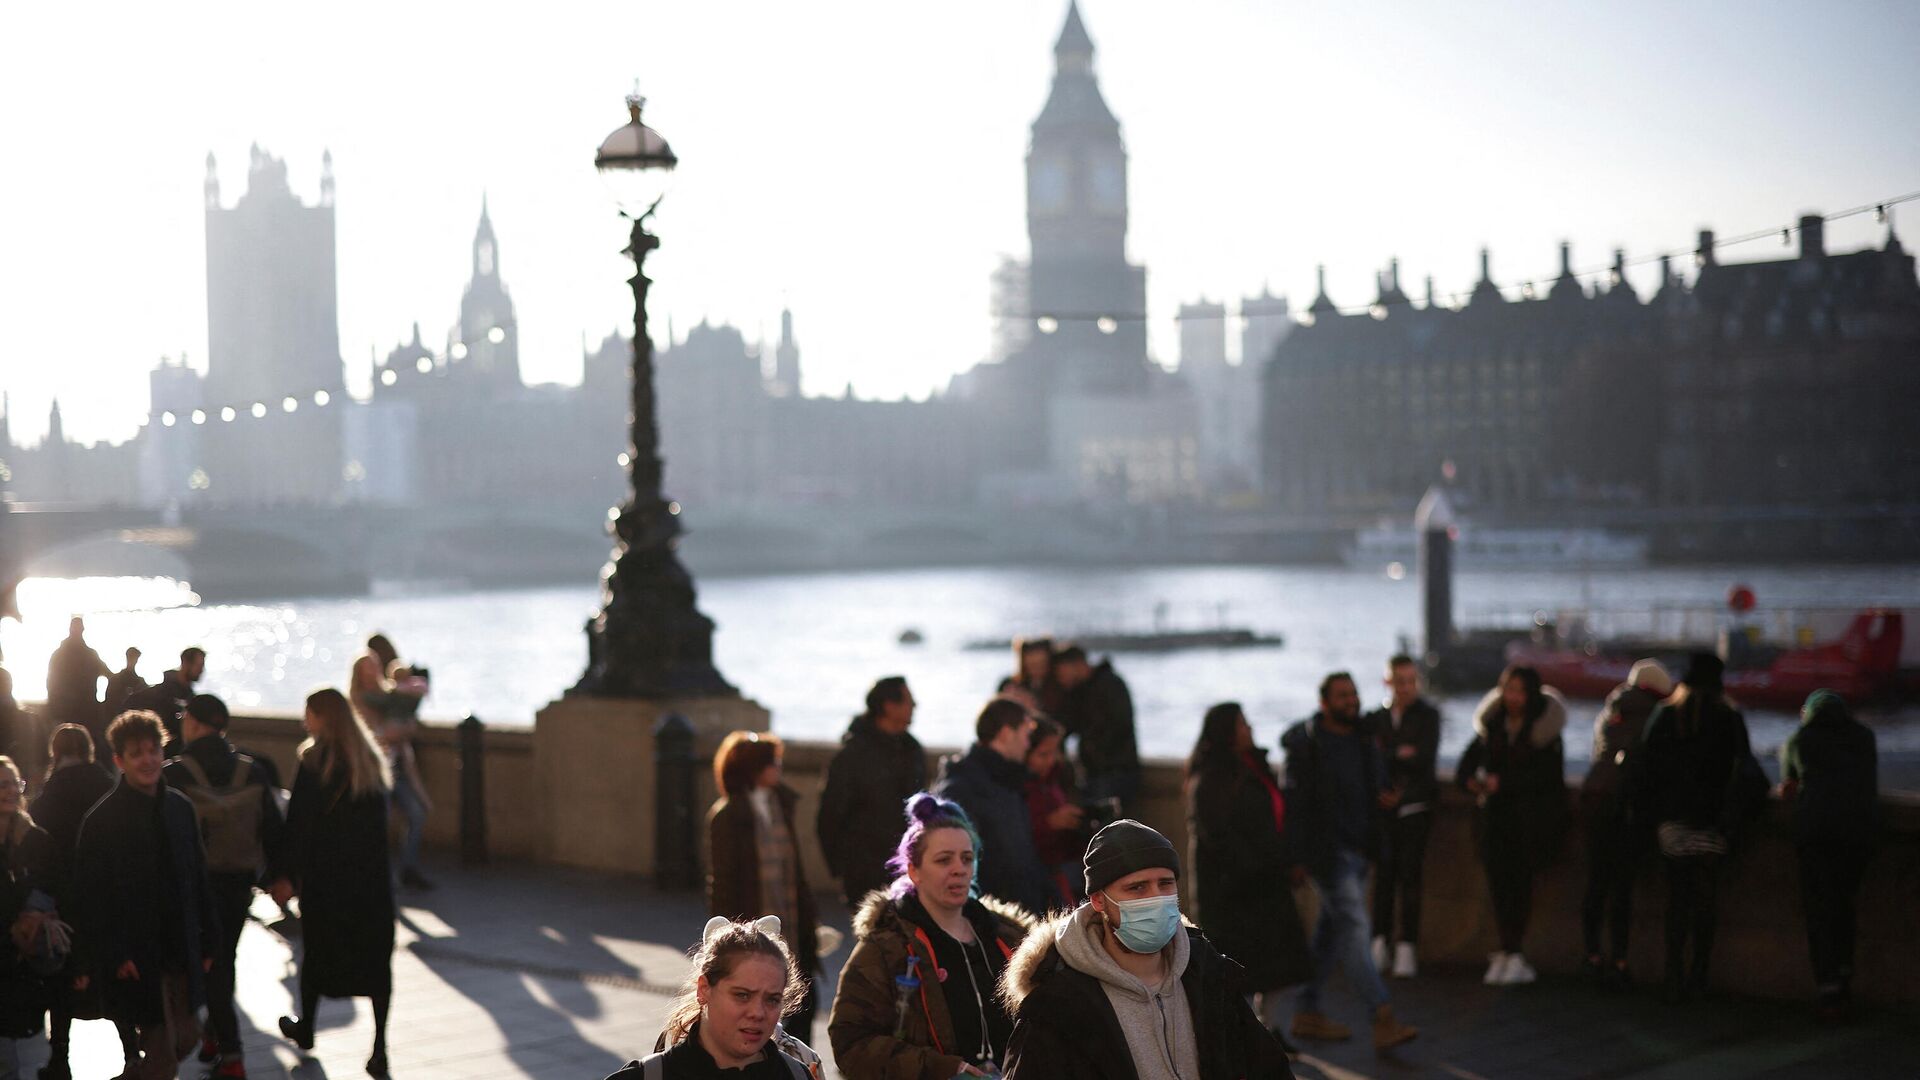 People walk along the South Bank, as the Houses of Parliament are seen at a distance, in London, Britain, January 16, 2022 - Sputnik International, 1920, 15.02.2022